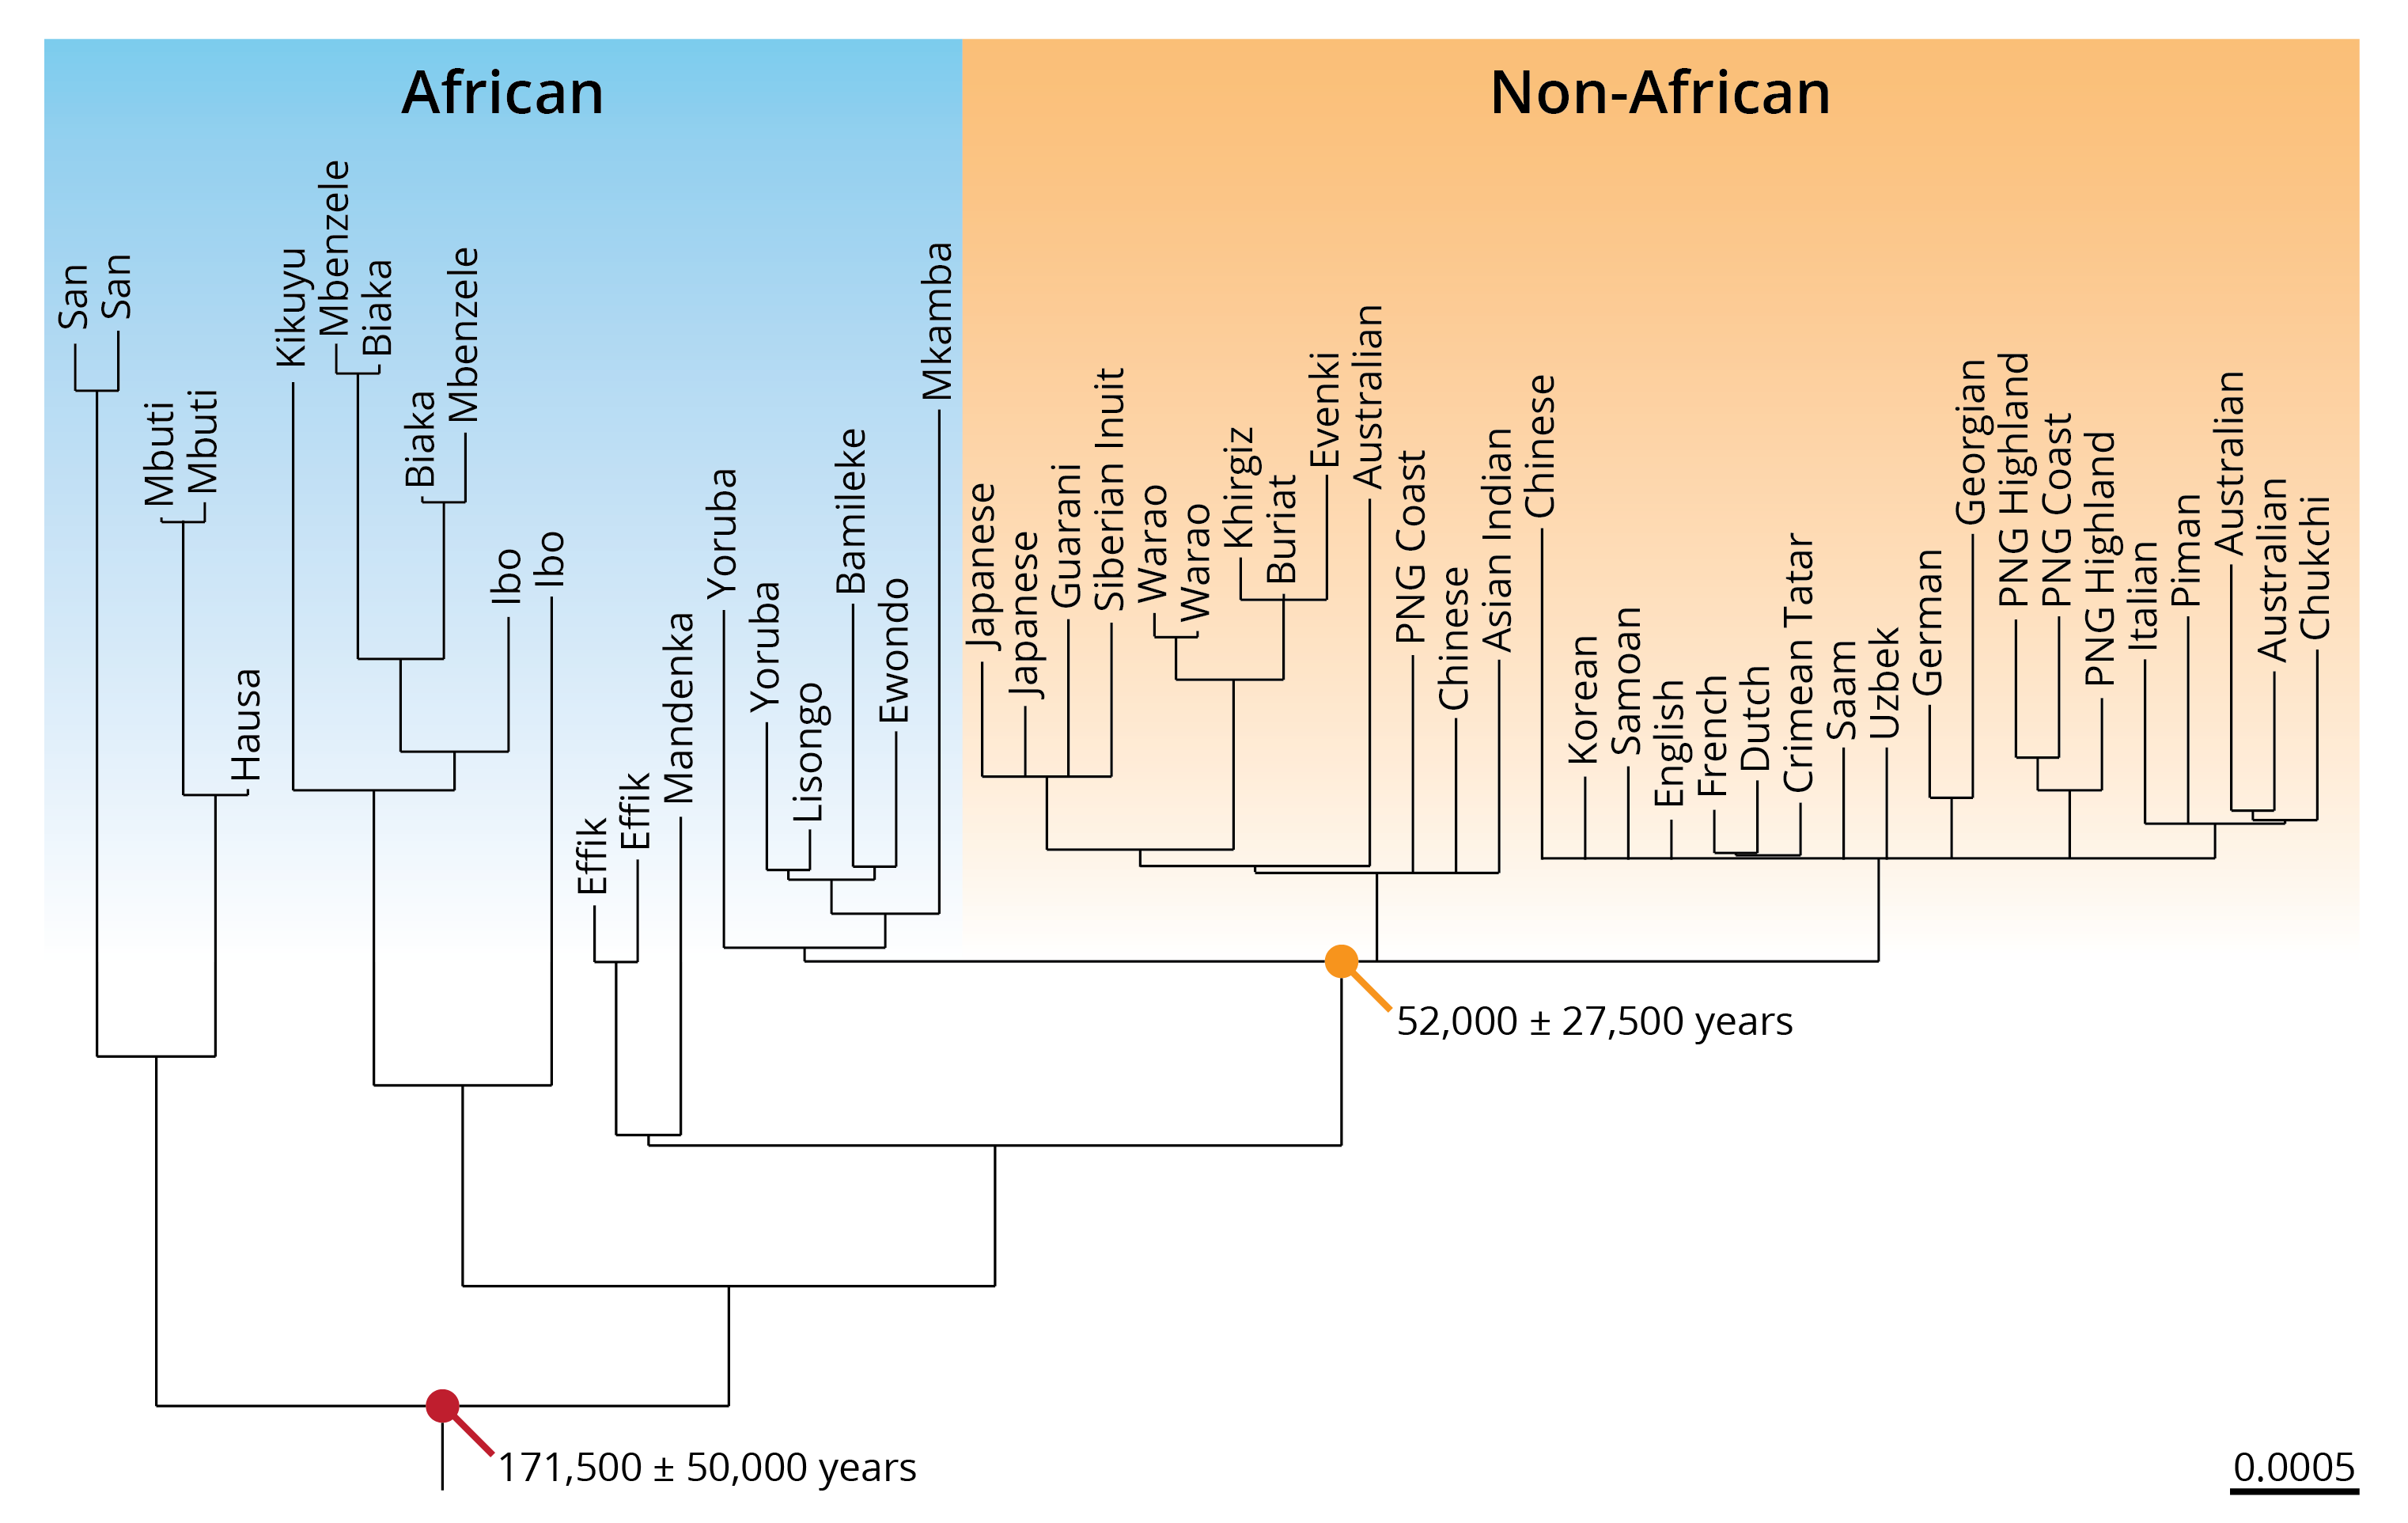 Phylogeny based on mitochondrial DNA sequences of extant human populations. African and non-African populations are indicated in color, and the estimated divergence times are indicated for the last common ancestor of all humans as well as the youngest clade containing both African and non-African populations. Adopted from Ingman et al. (2000).